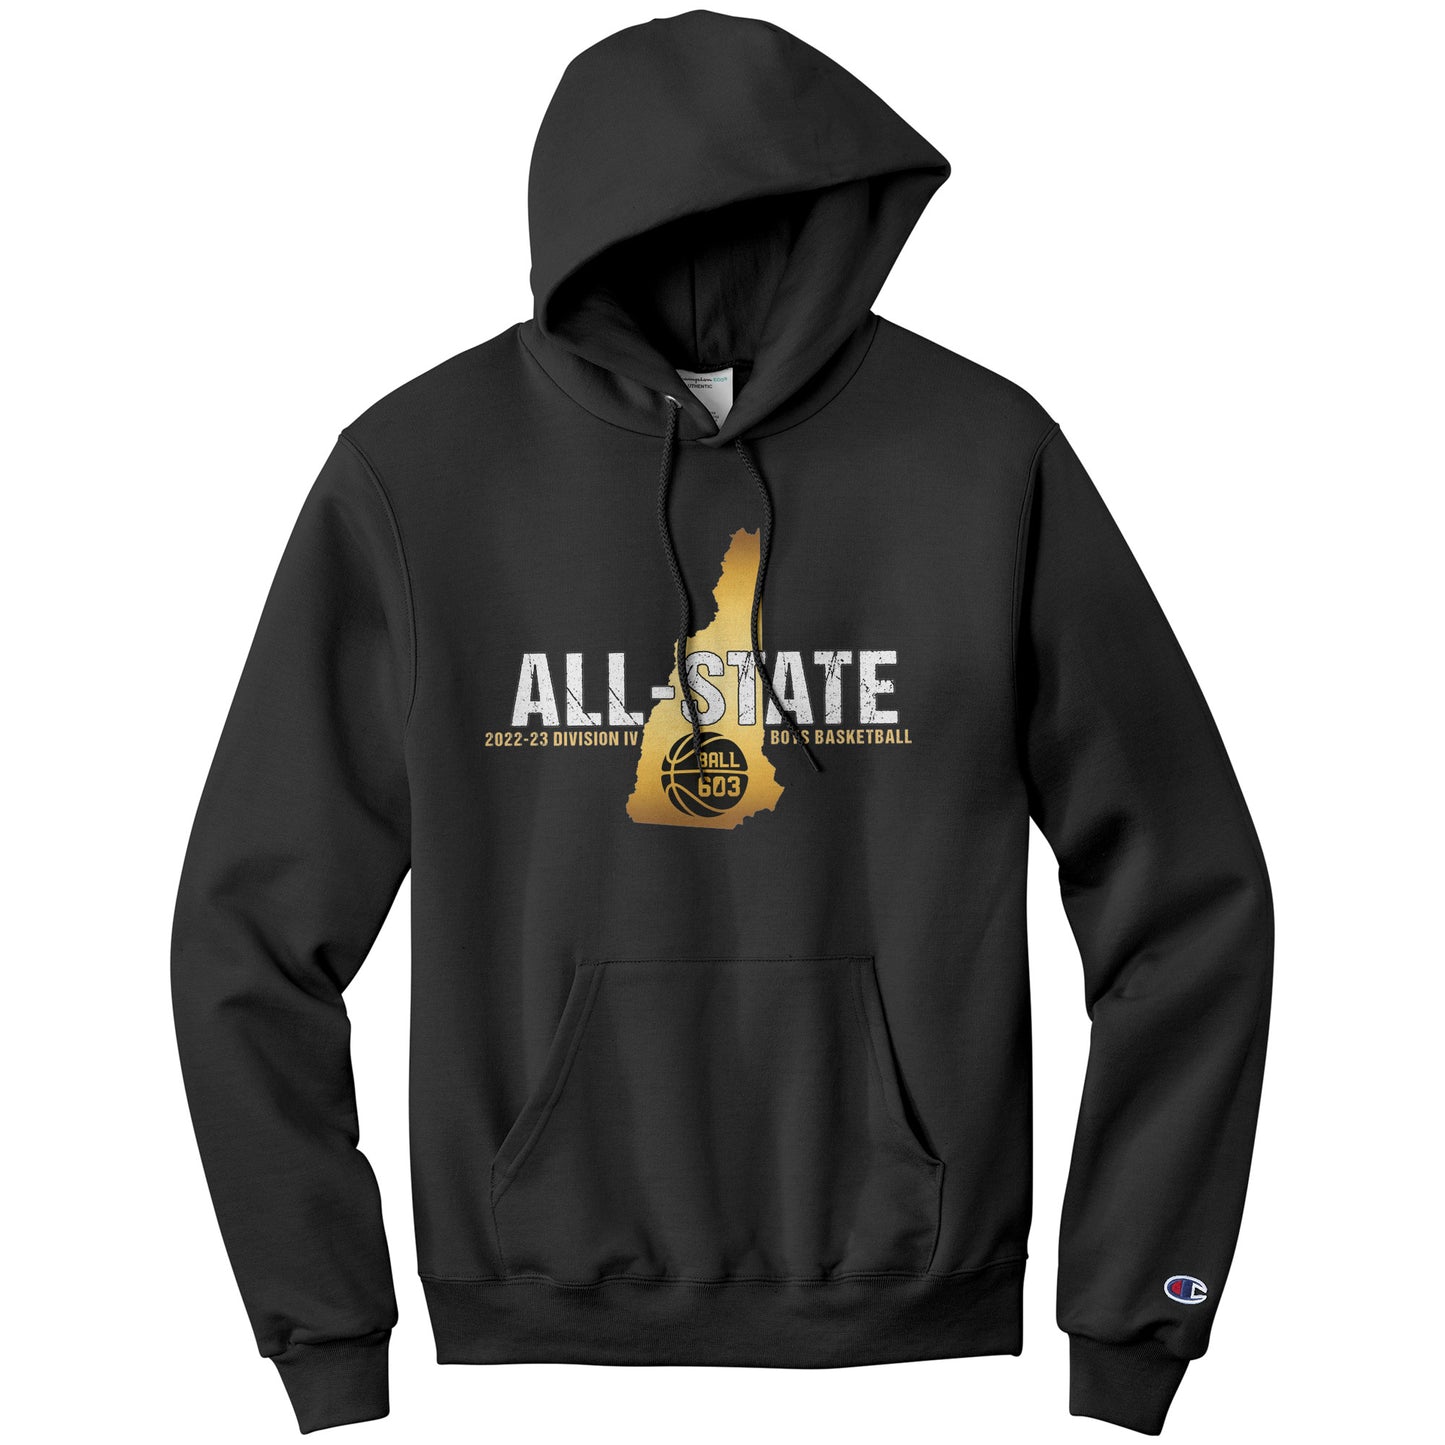 All-State D4 Boys: Champion Hoodie